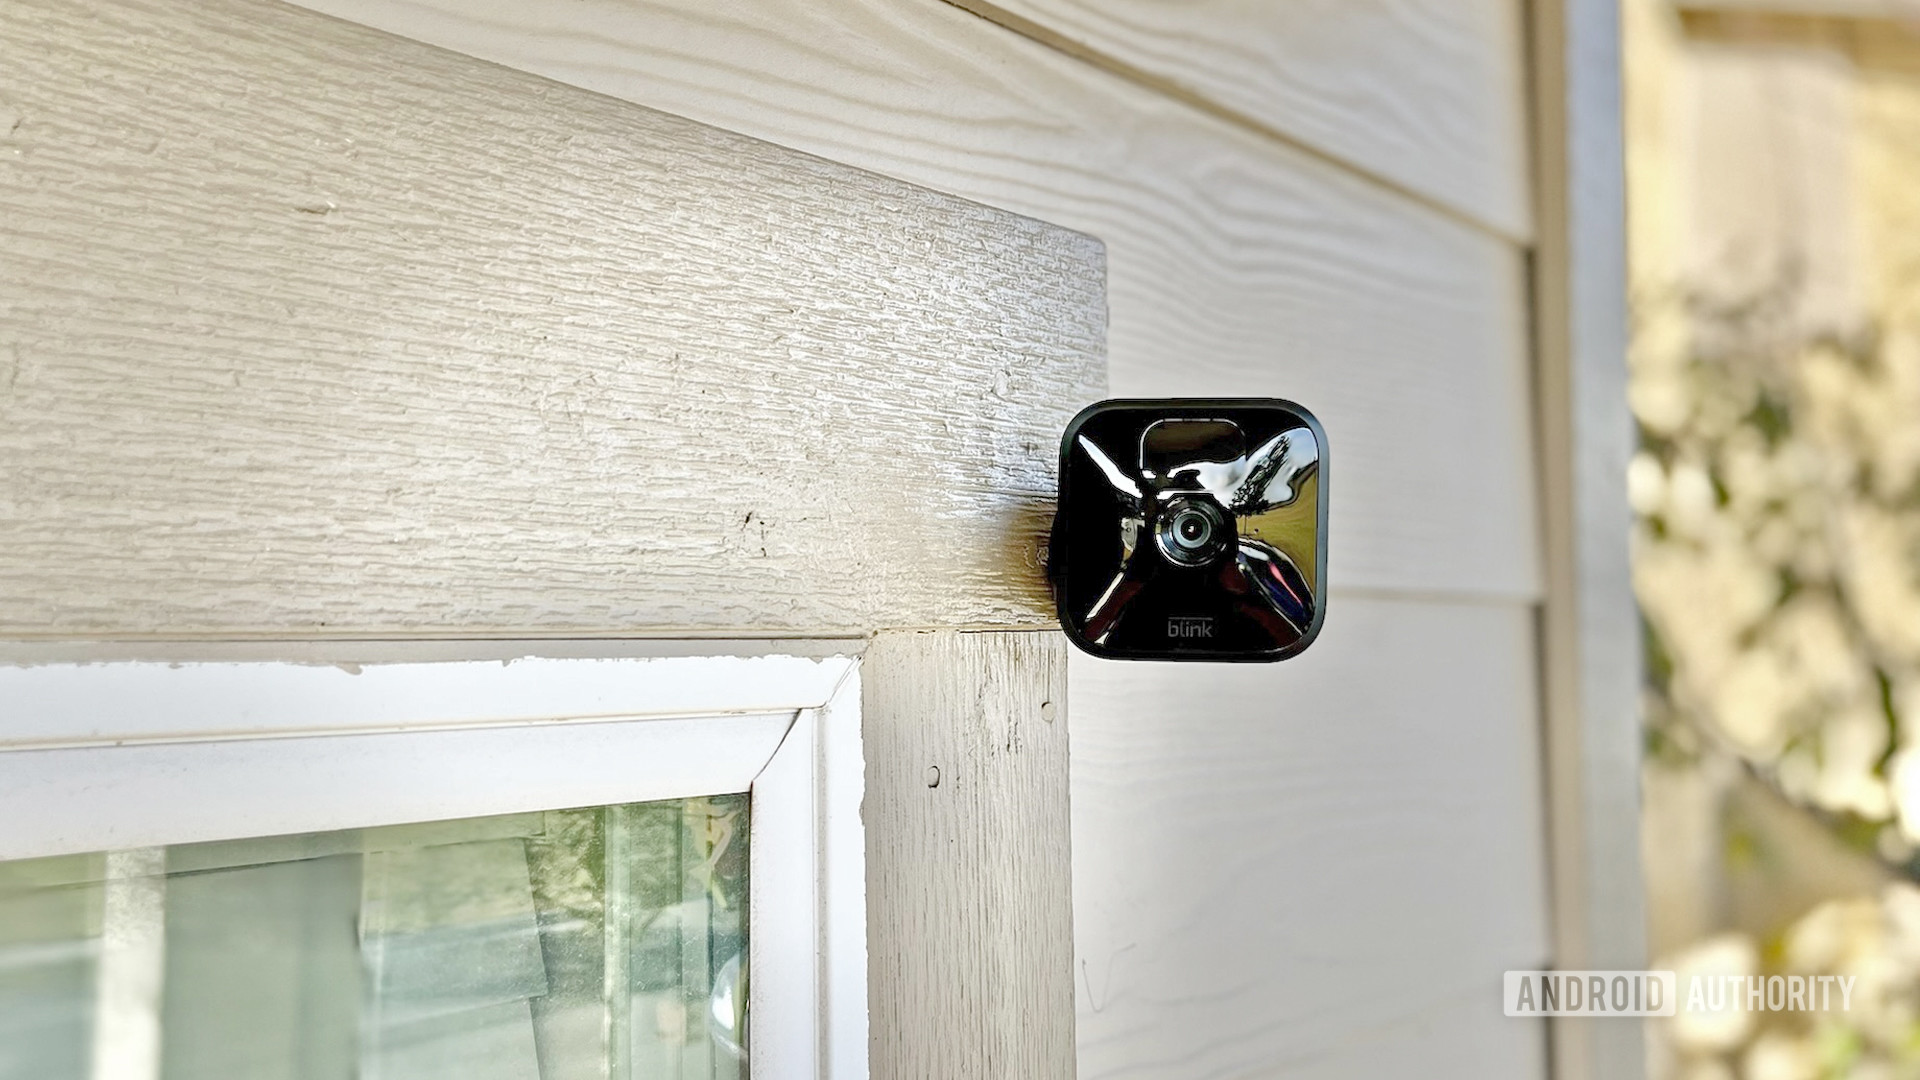 The Blink Outdoor camera perched outside a house